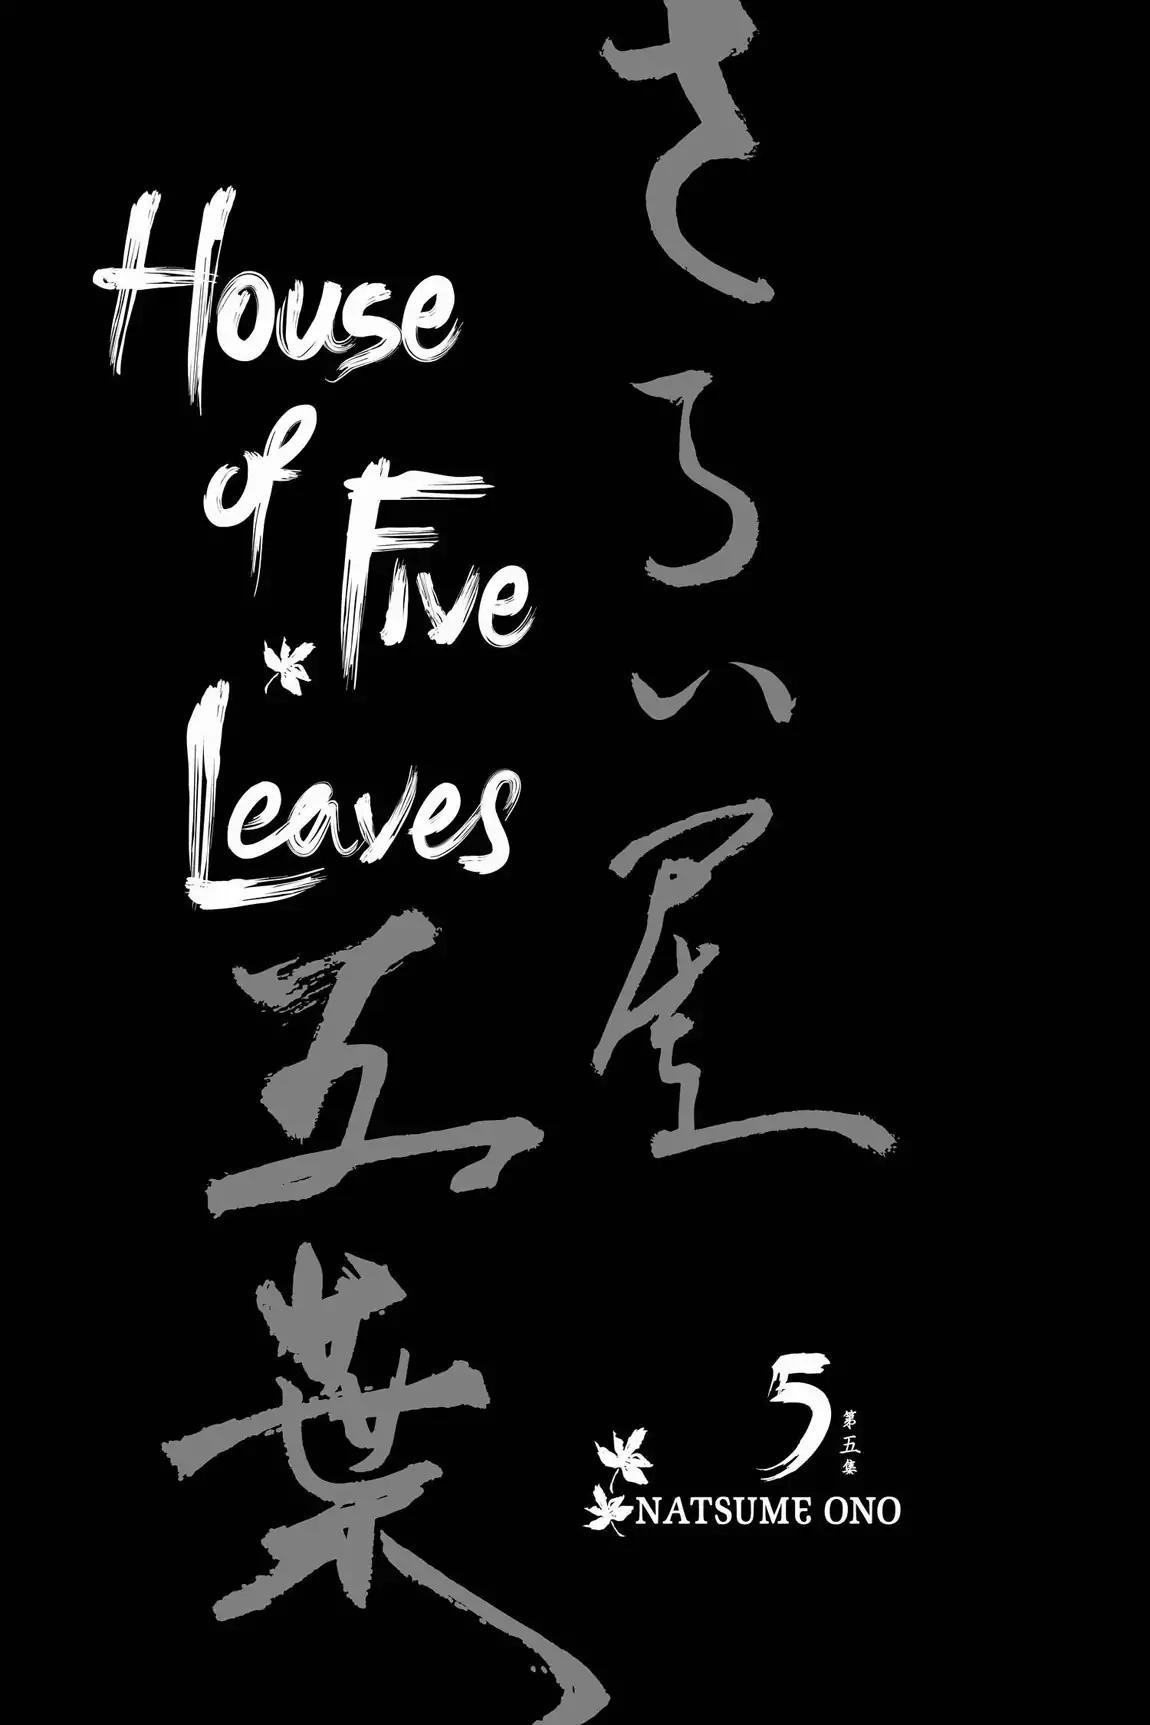 House of Five Leaves - episode 34 - 3